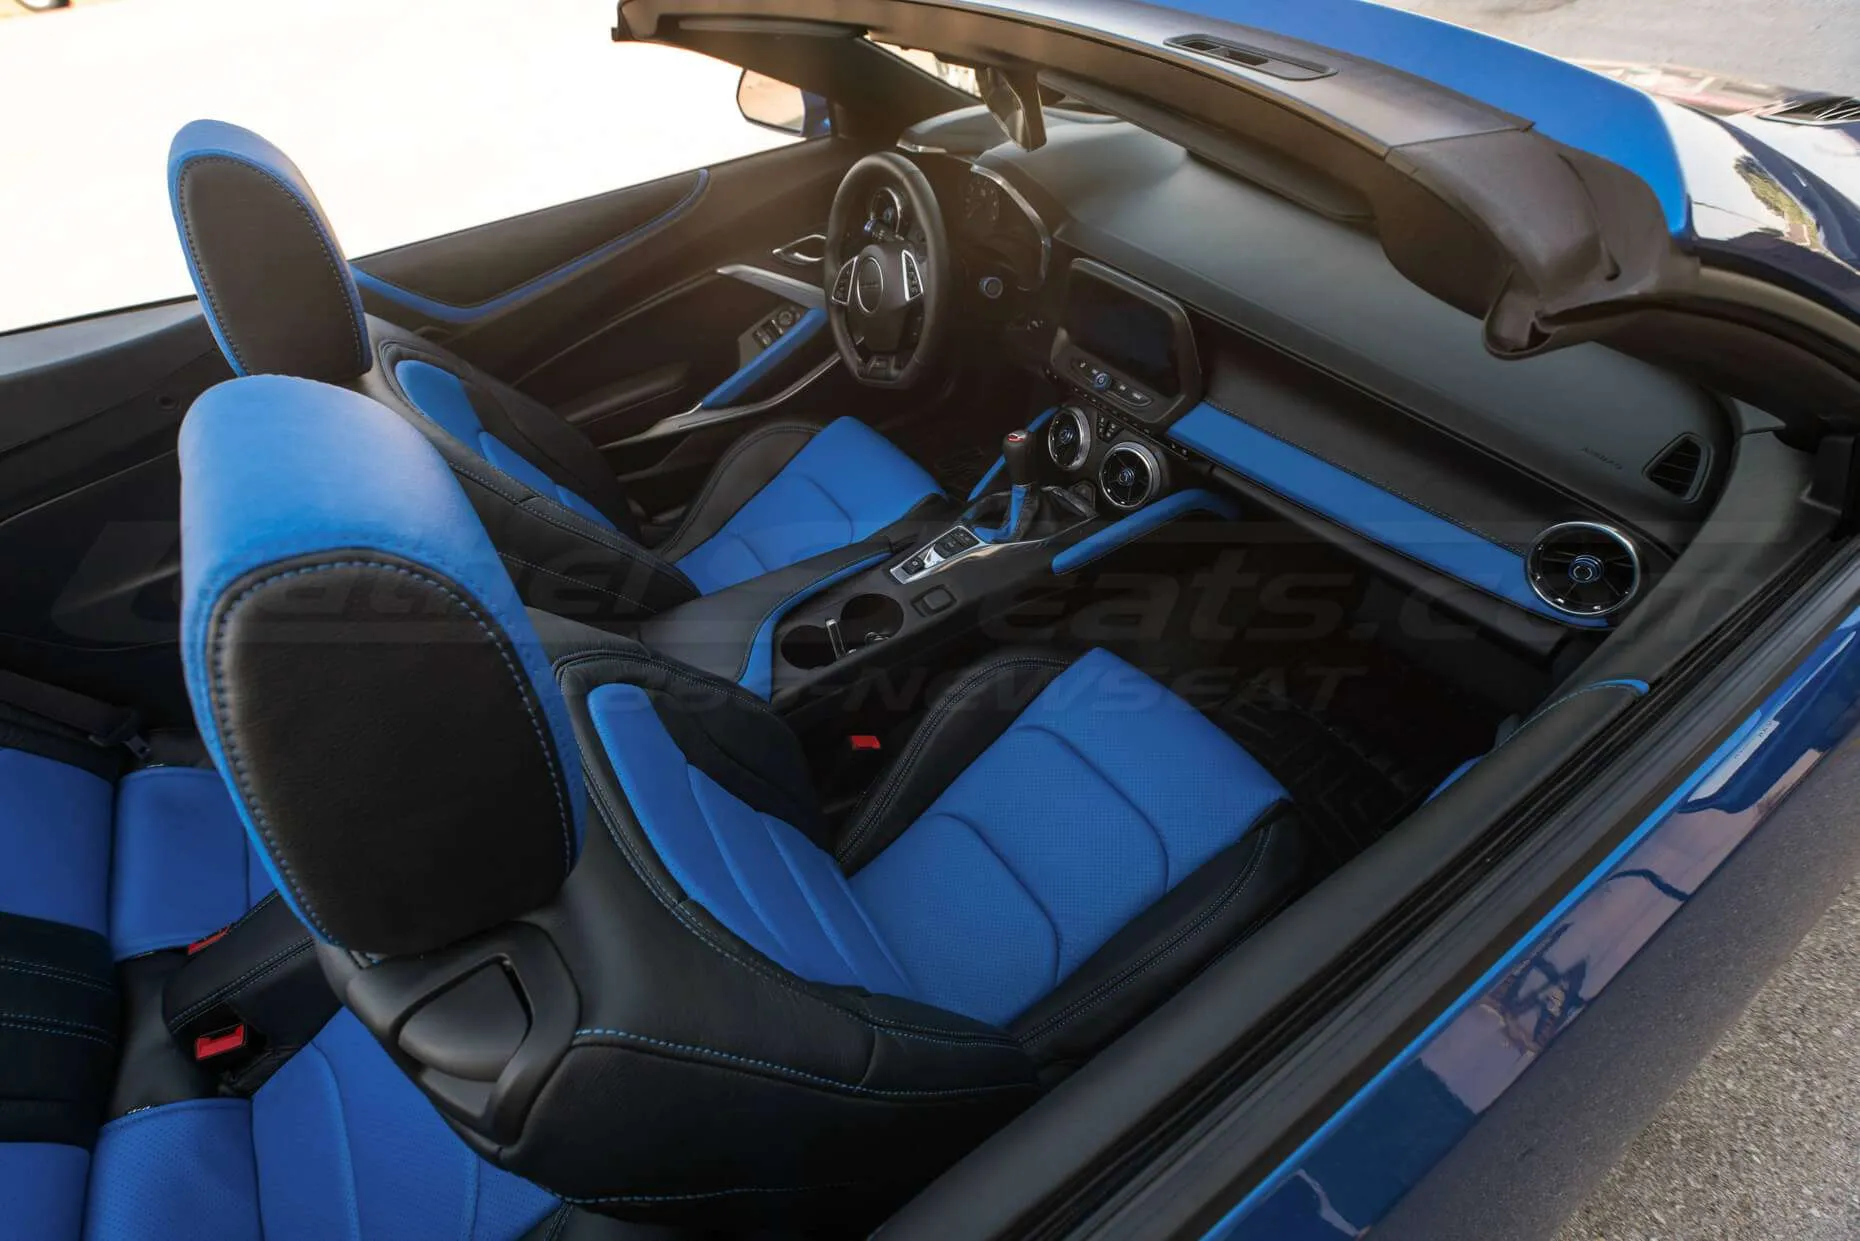 Top-down view of passenger two-tone Chevy Camaro leather seat